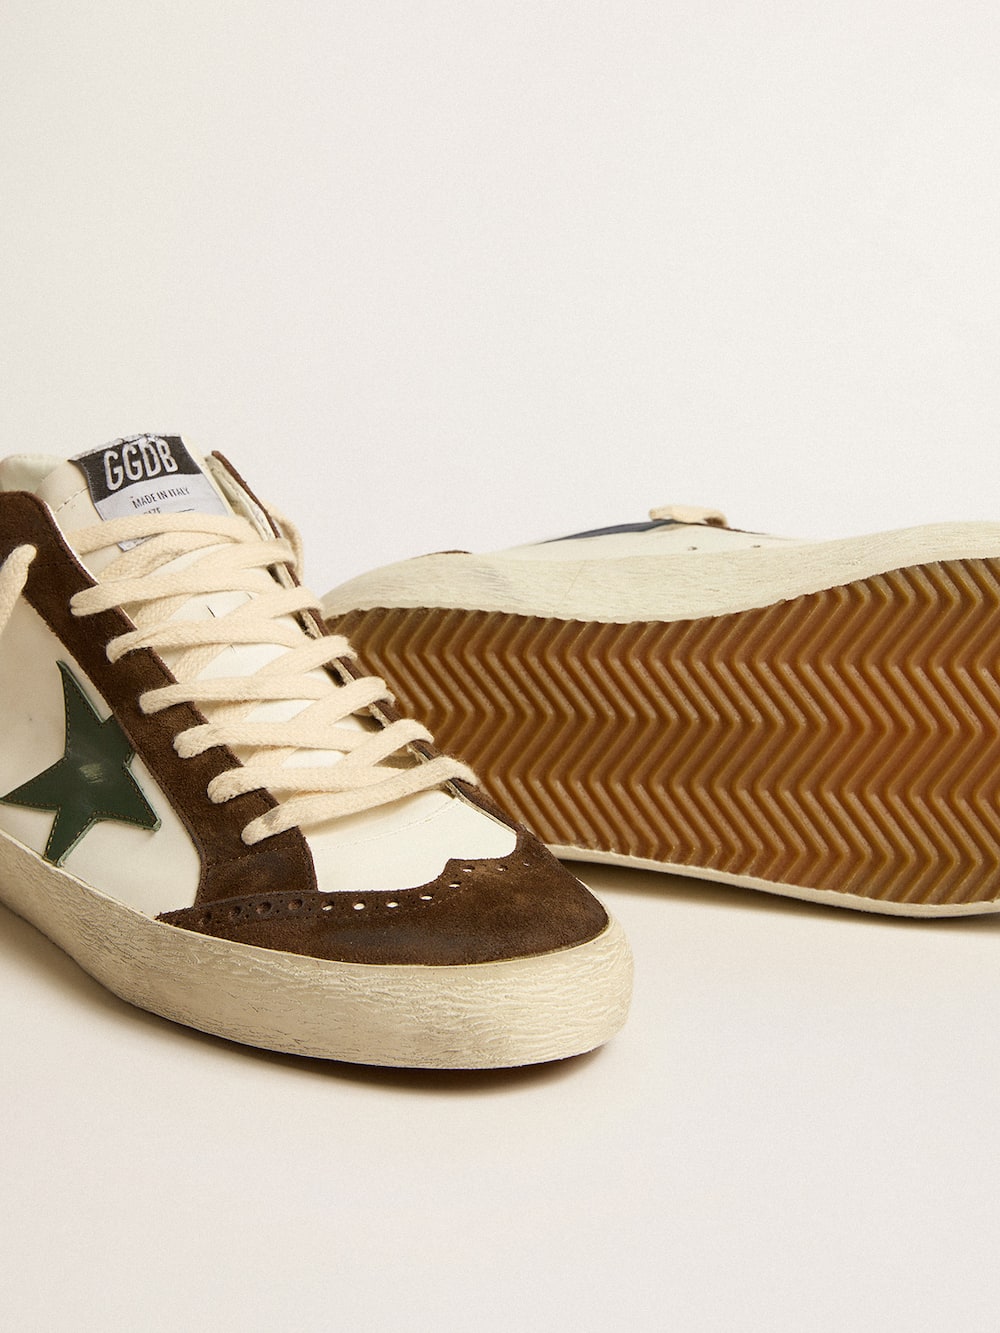 Golden Goose - Mid Star with green leather star and blue leather flash in 